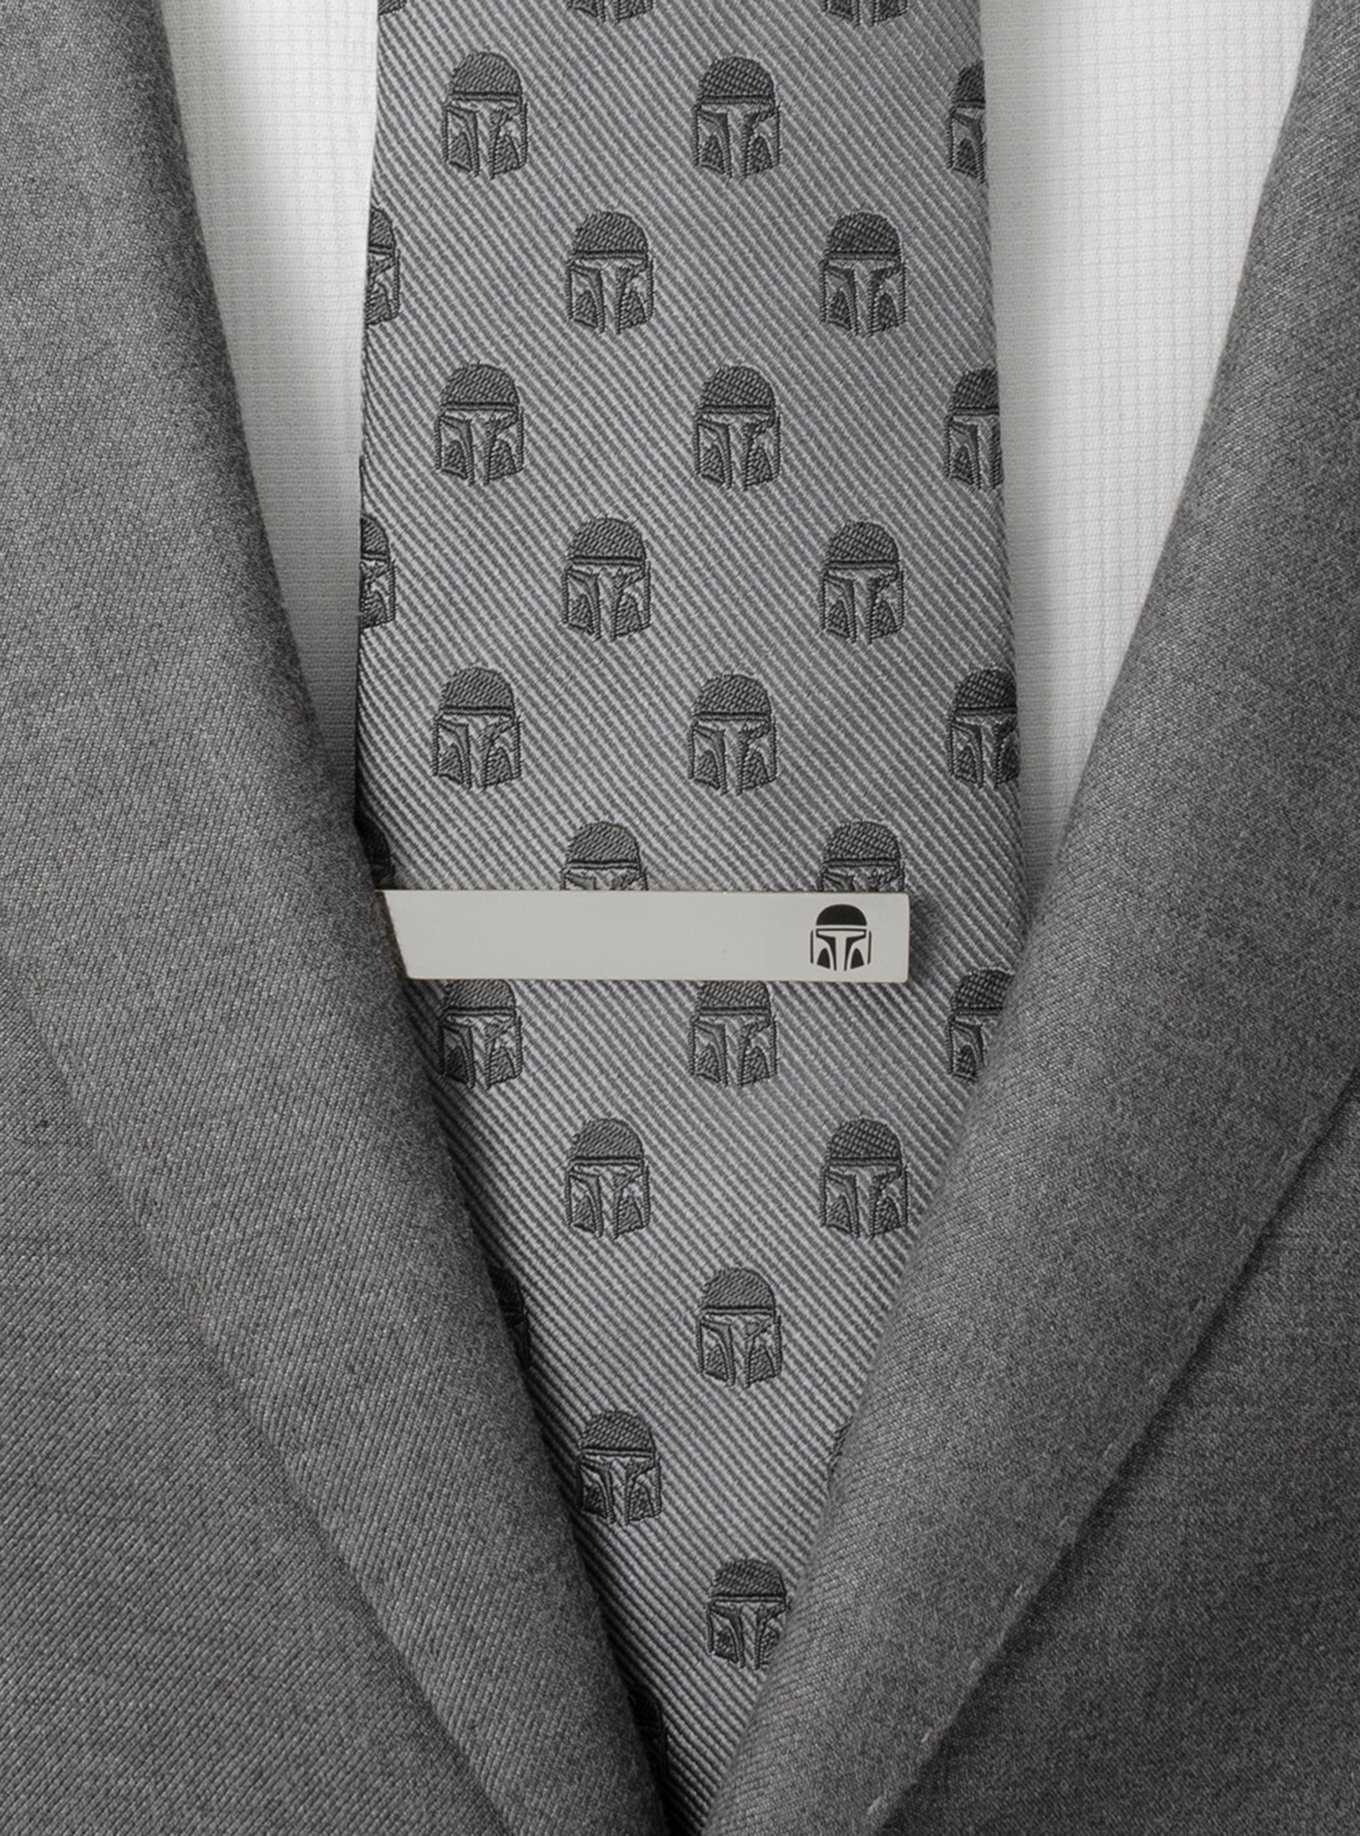 Star Wars The Mandalorian "This is the Way" Tie Bar, , hi-res